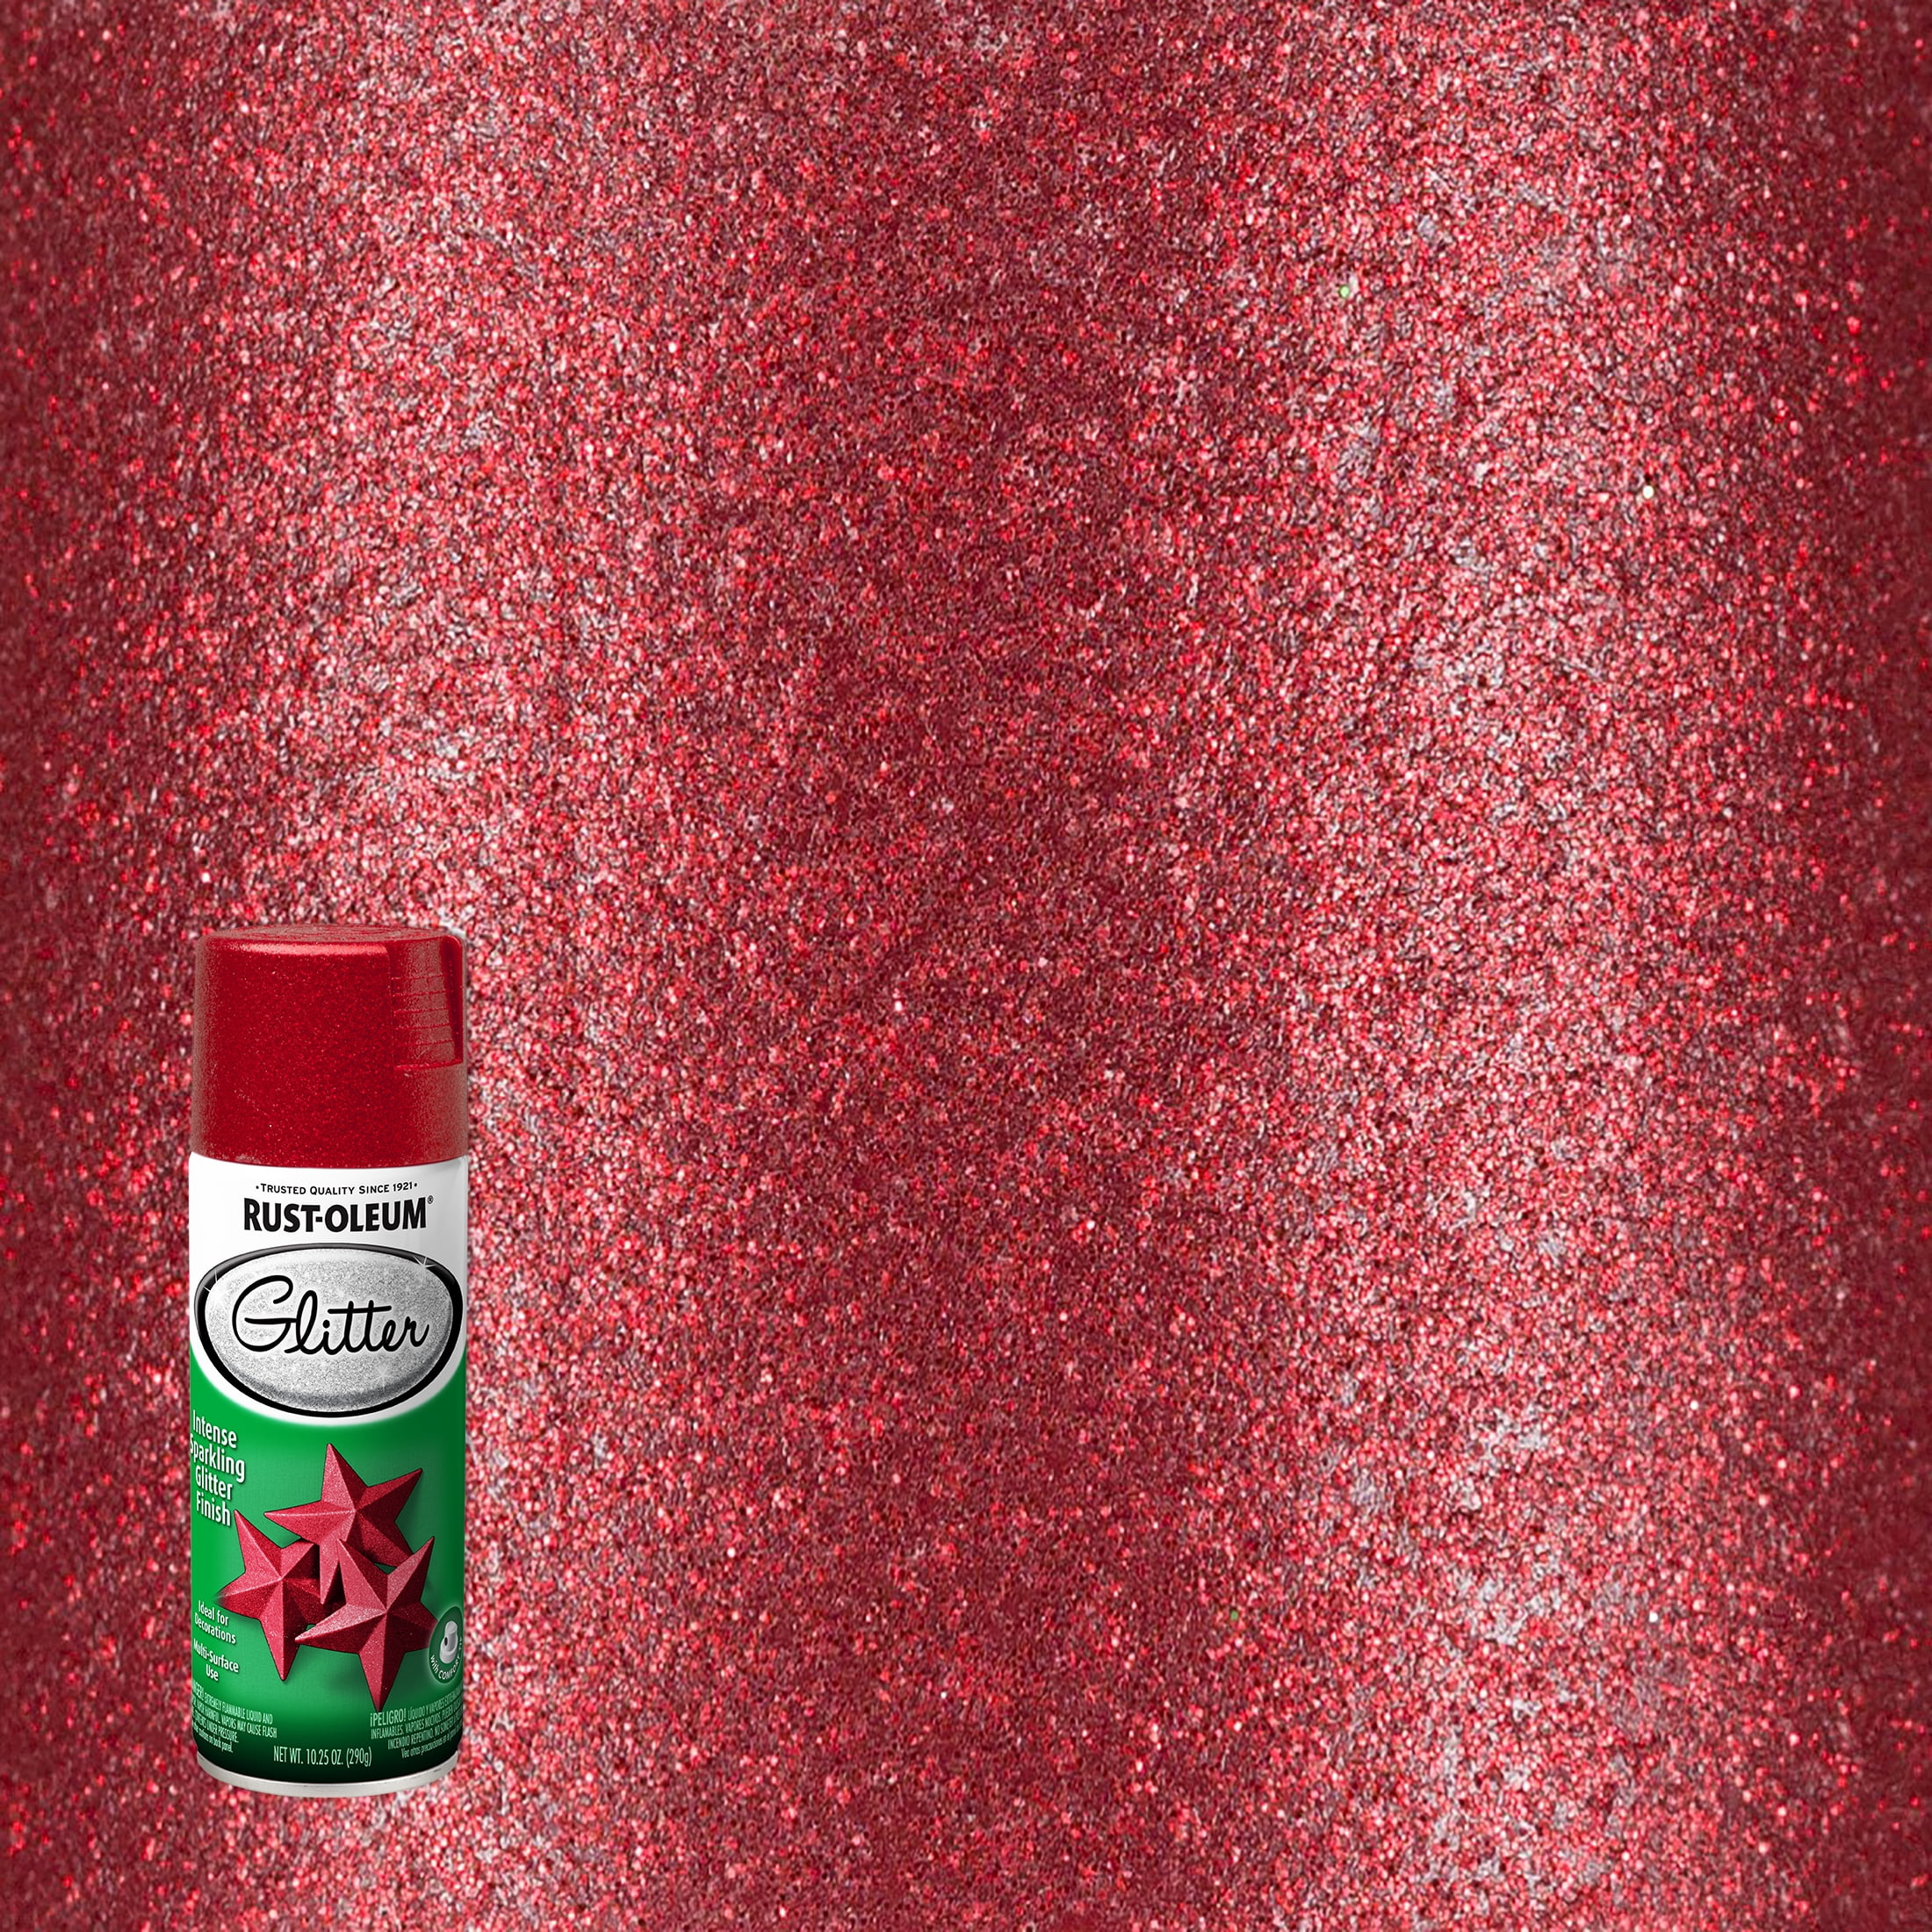 Rust-Oleum 268045-2PK Specialty Glitter Spray, 10.25 Ounce (Pack of 2),  Red, 2 Piece 